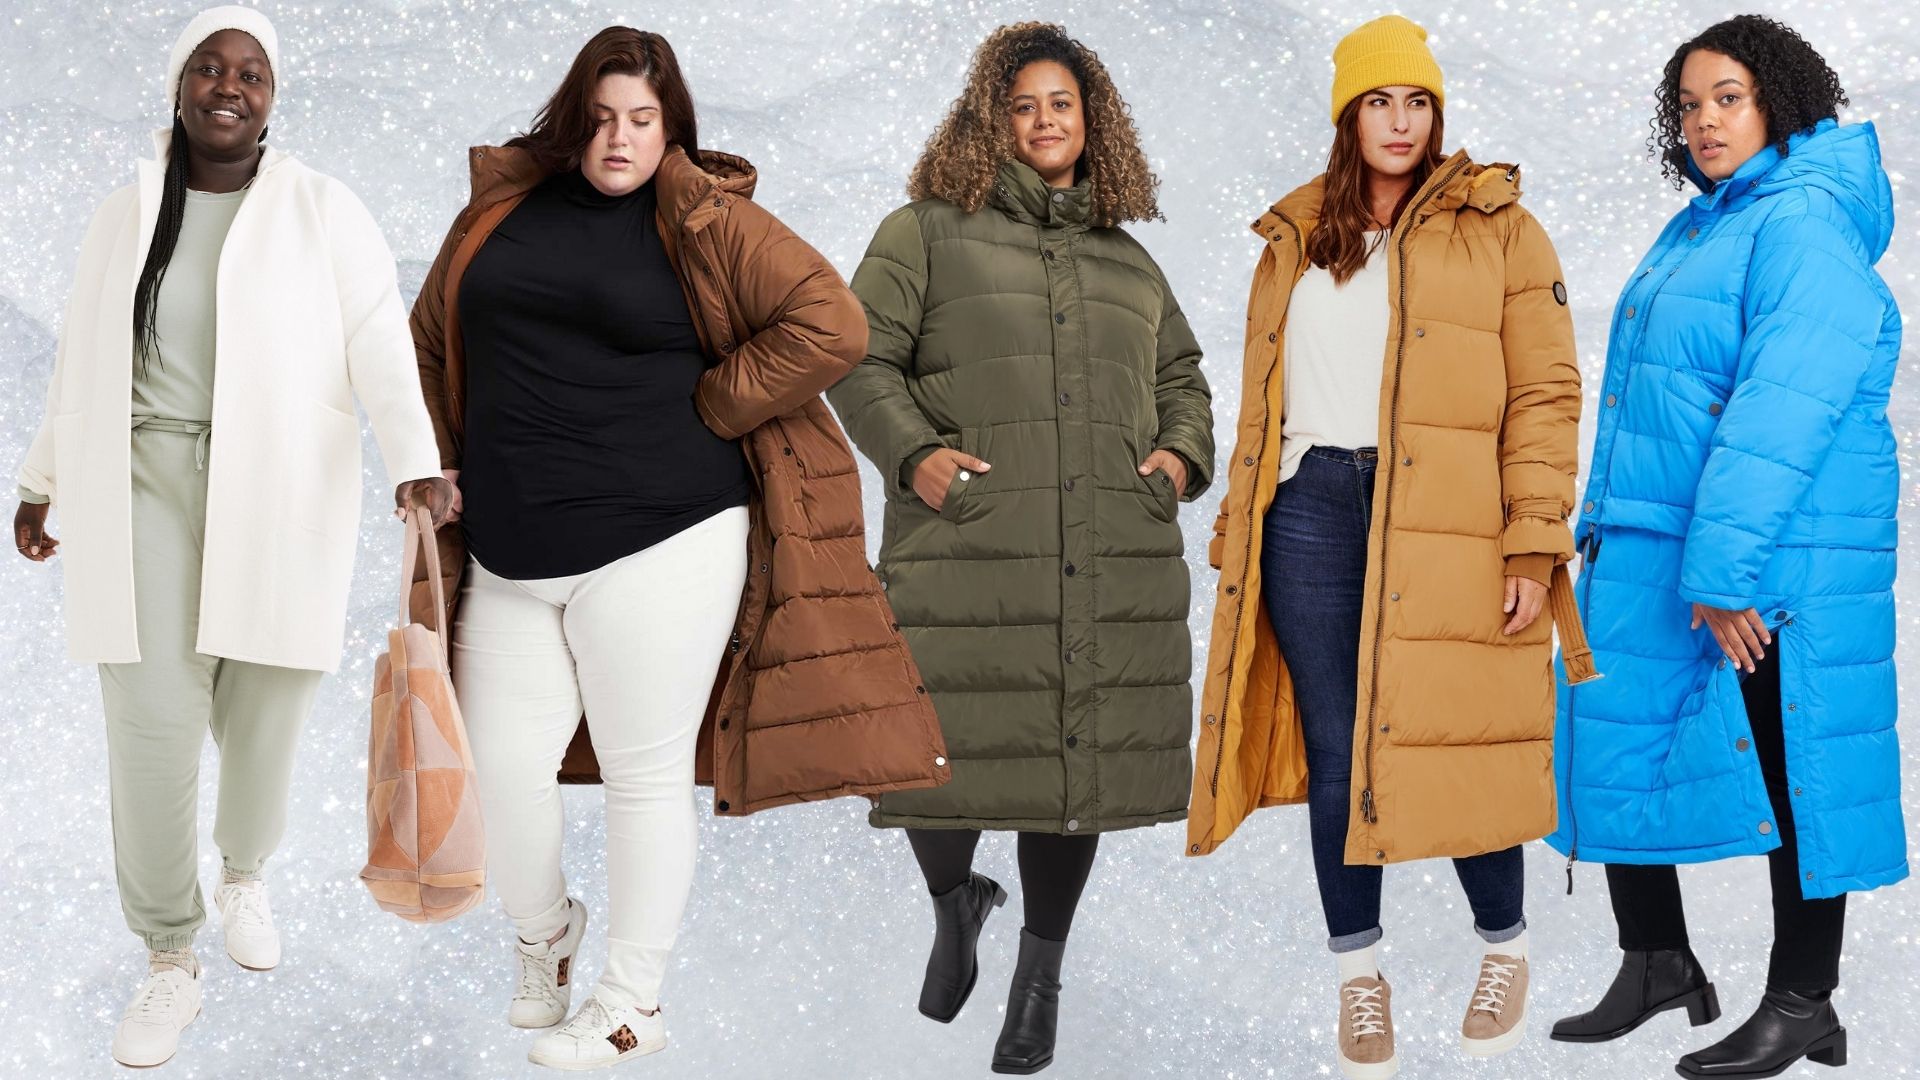 The 10 Best Plus Size Winter Coats to Make You Look Amazing